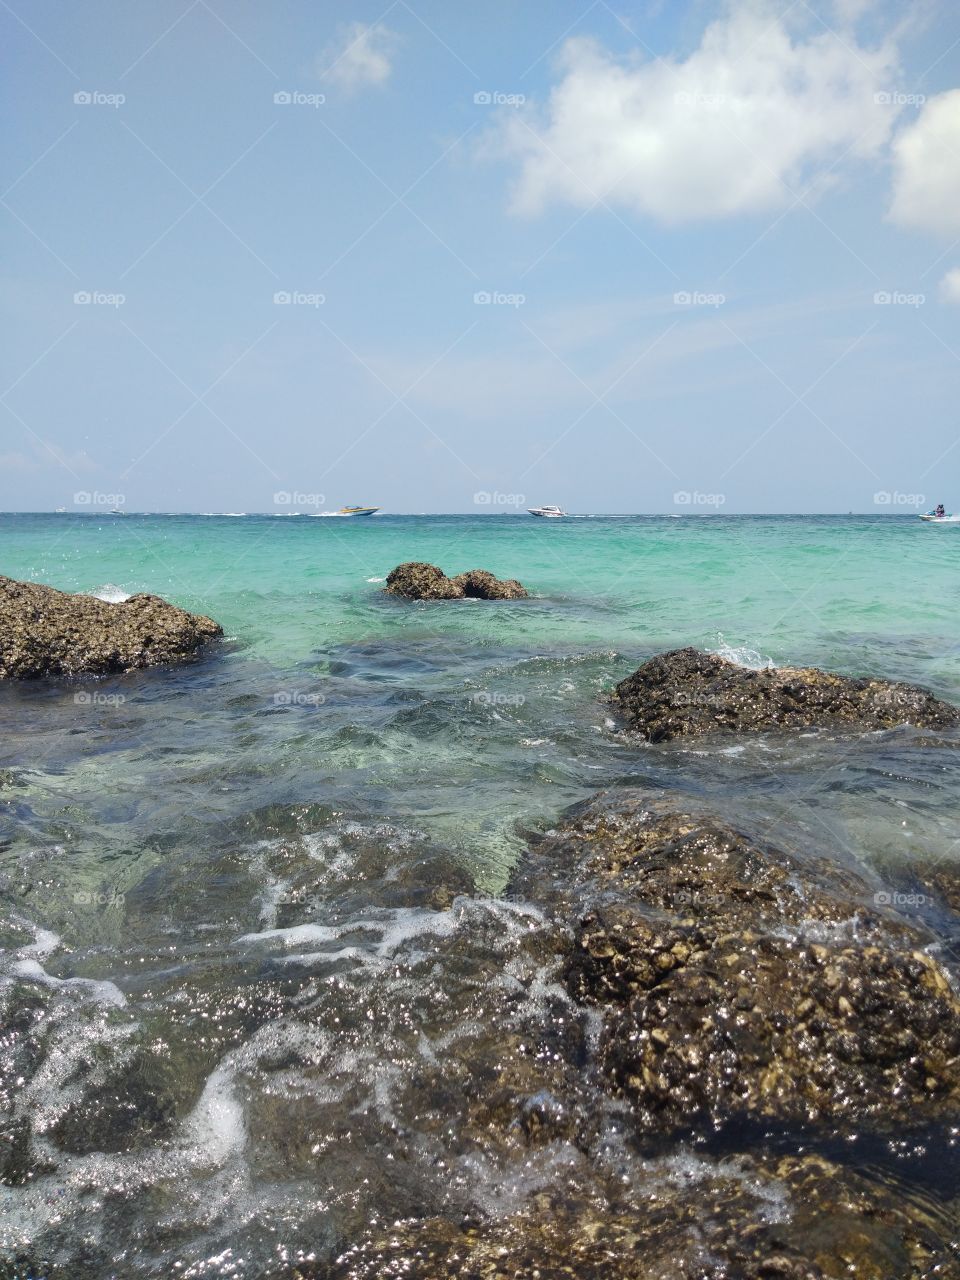 The beautiful sea view consisting of clear waters, rocks, bright skies, white clouds and  sunlight.